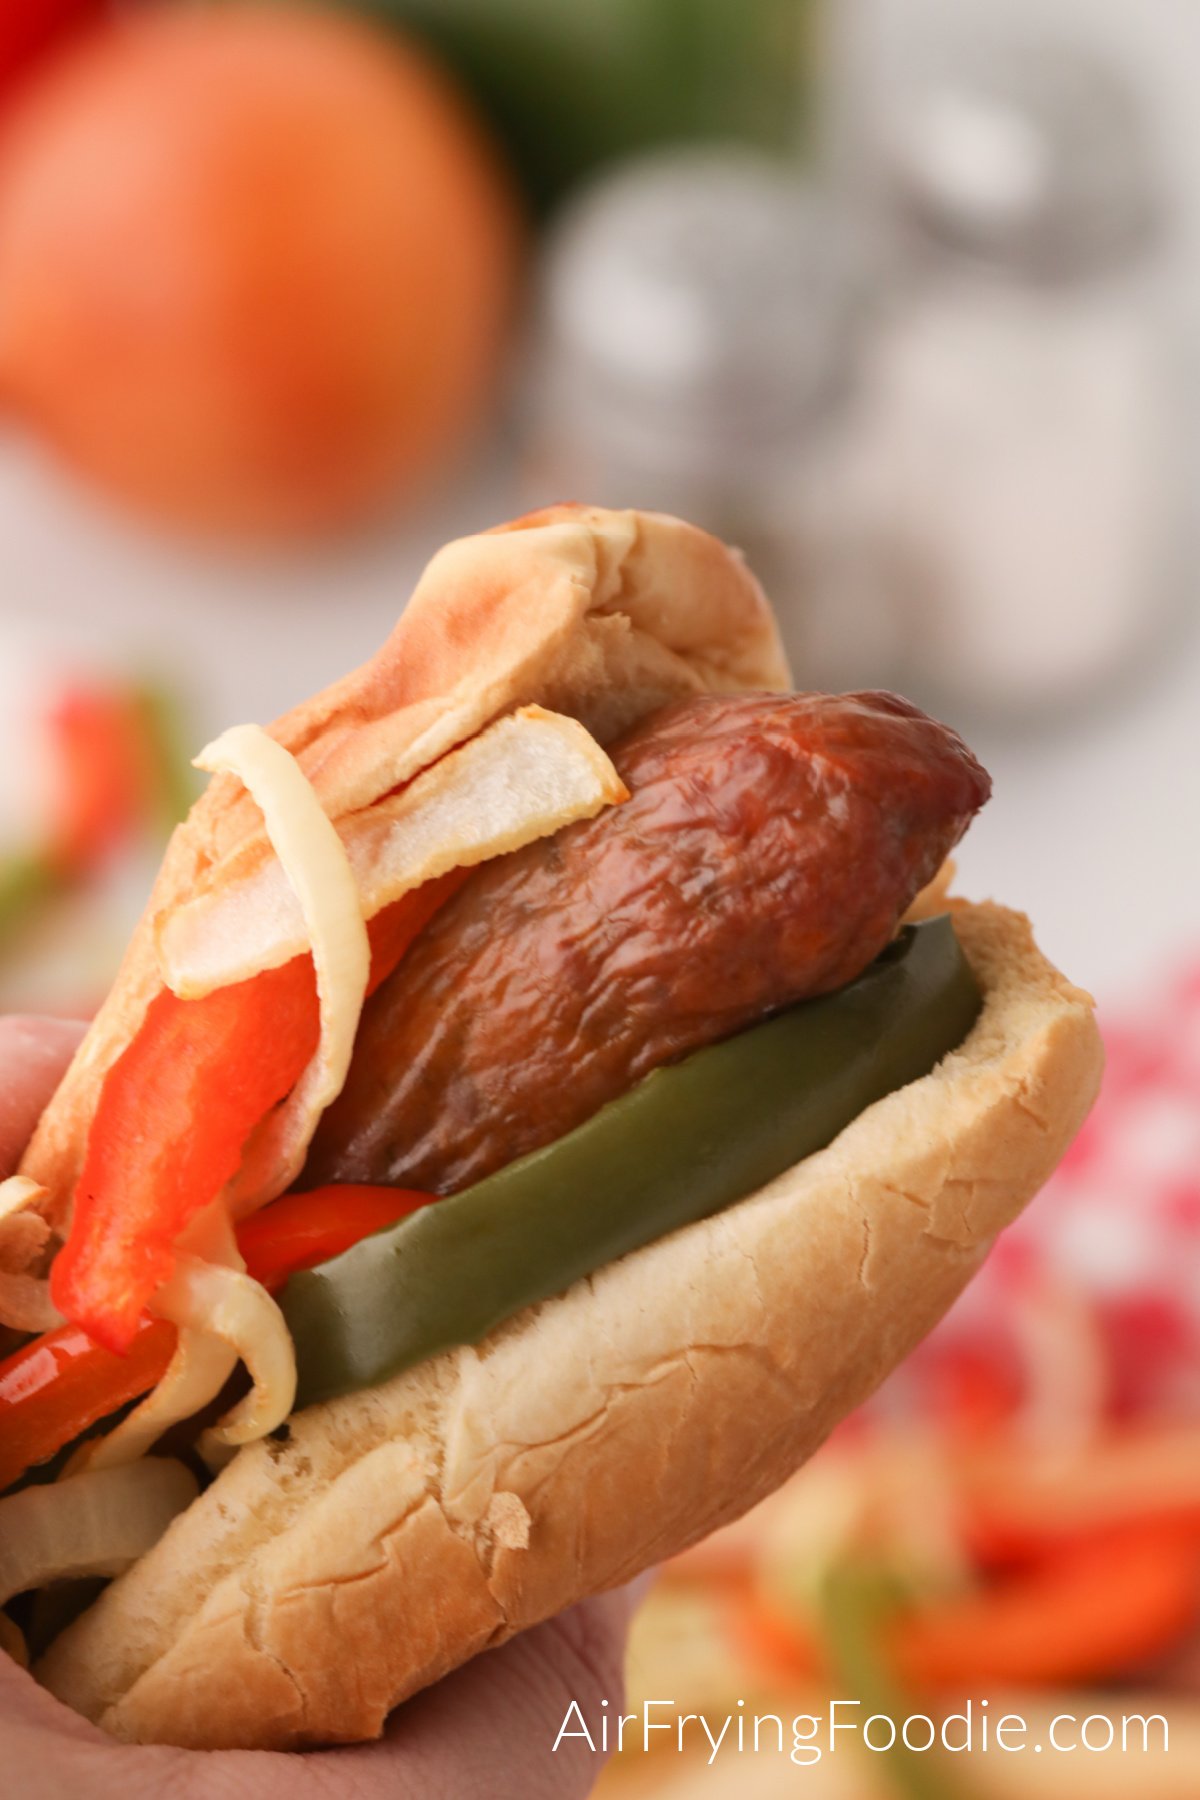 Italian Sausage made in air fryer with peppers and onion and served with a bun - hand holding the bun and ready to eat.